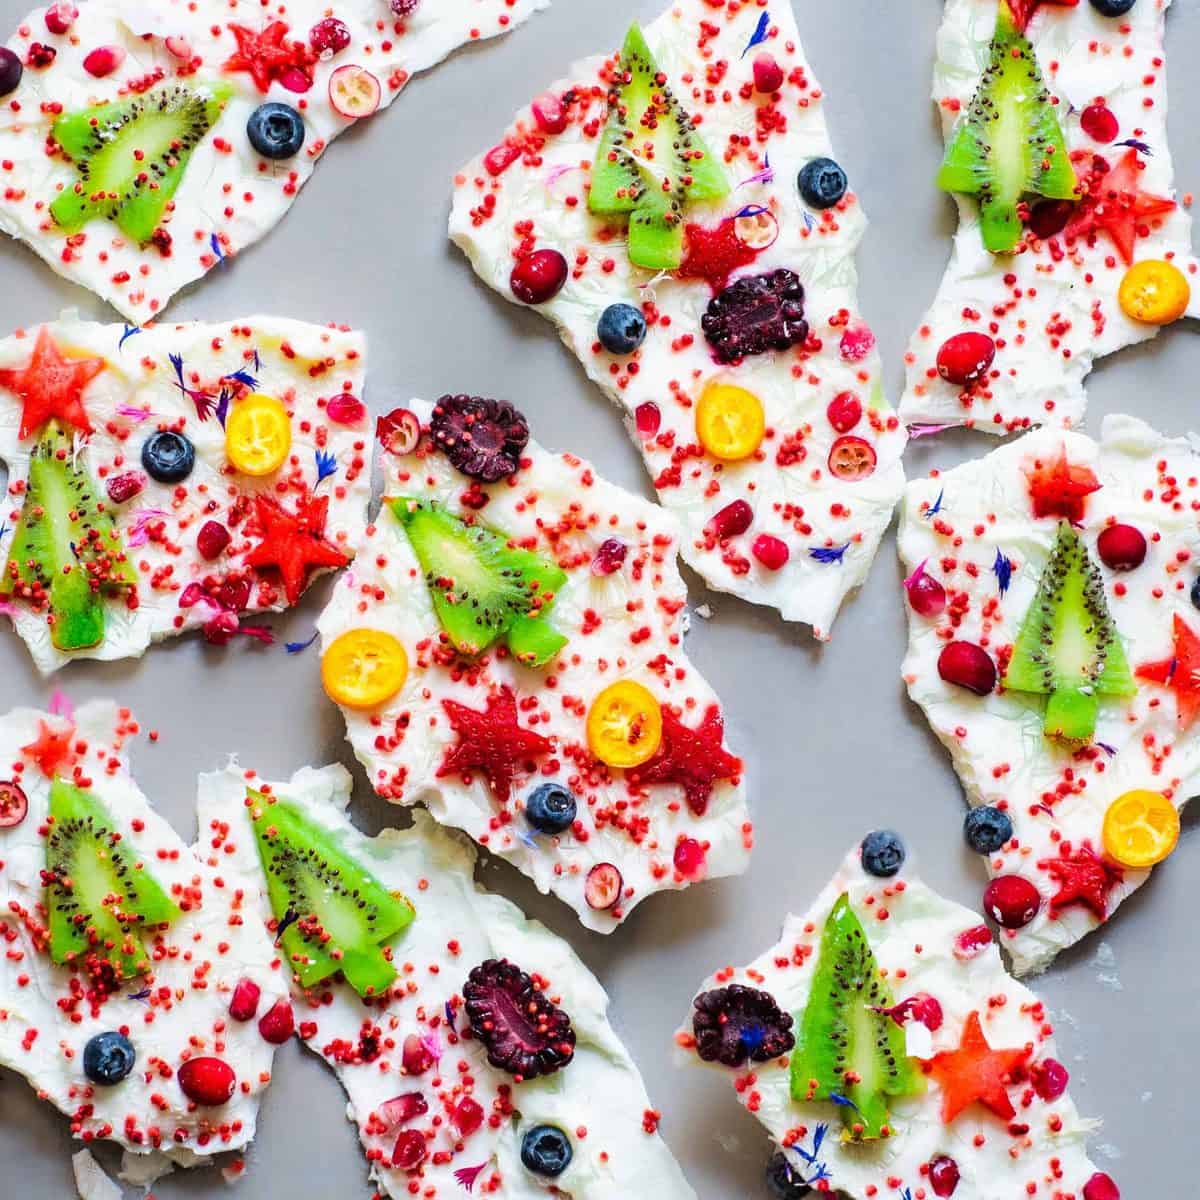 Yogurt bark pieces decorated with red puffed quinoa kiwis and other fruit 